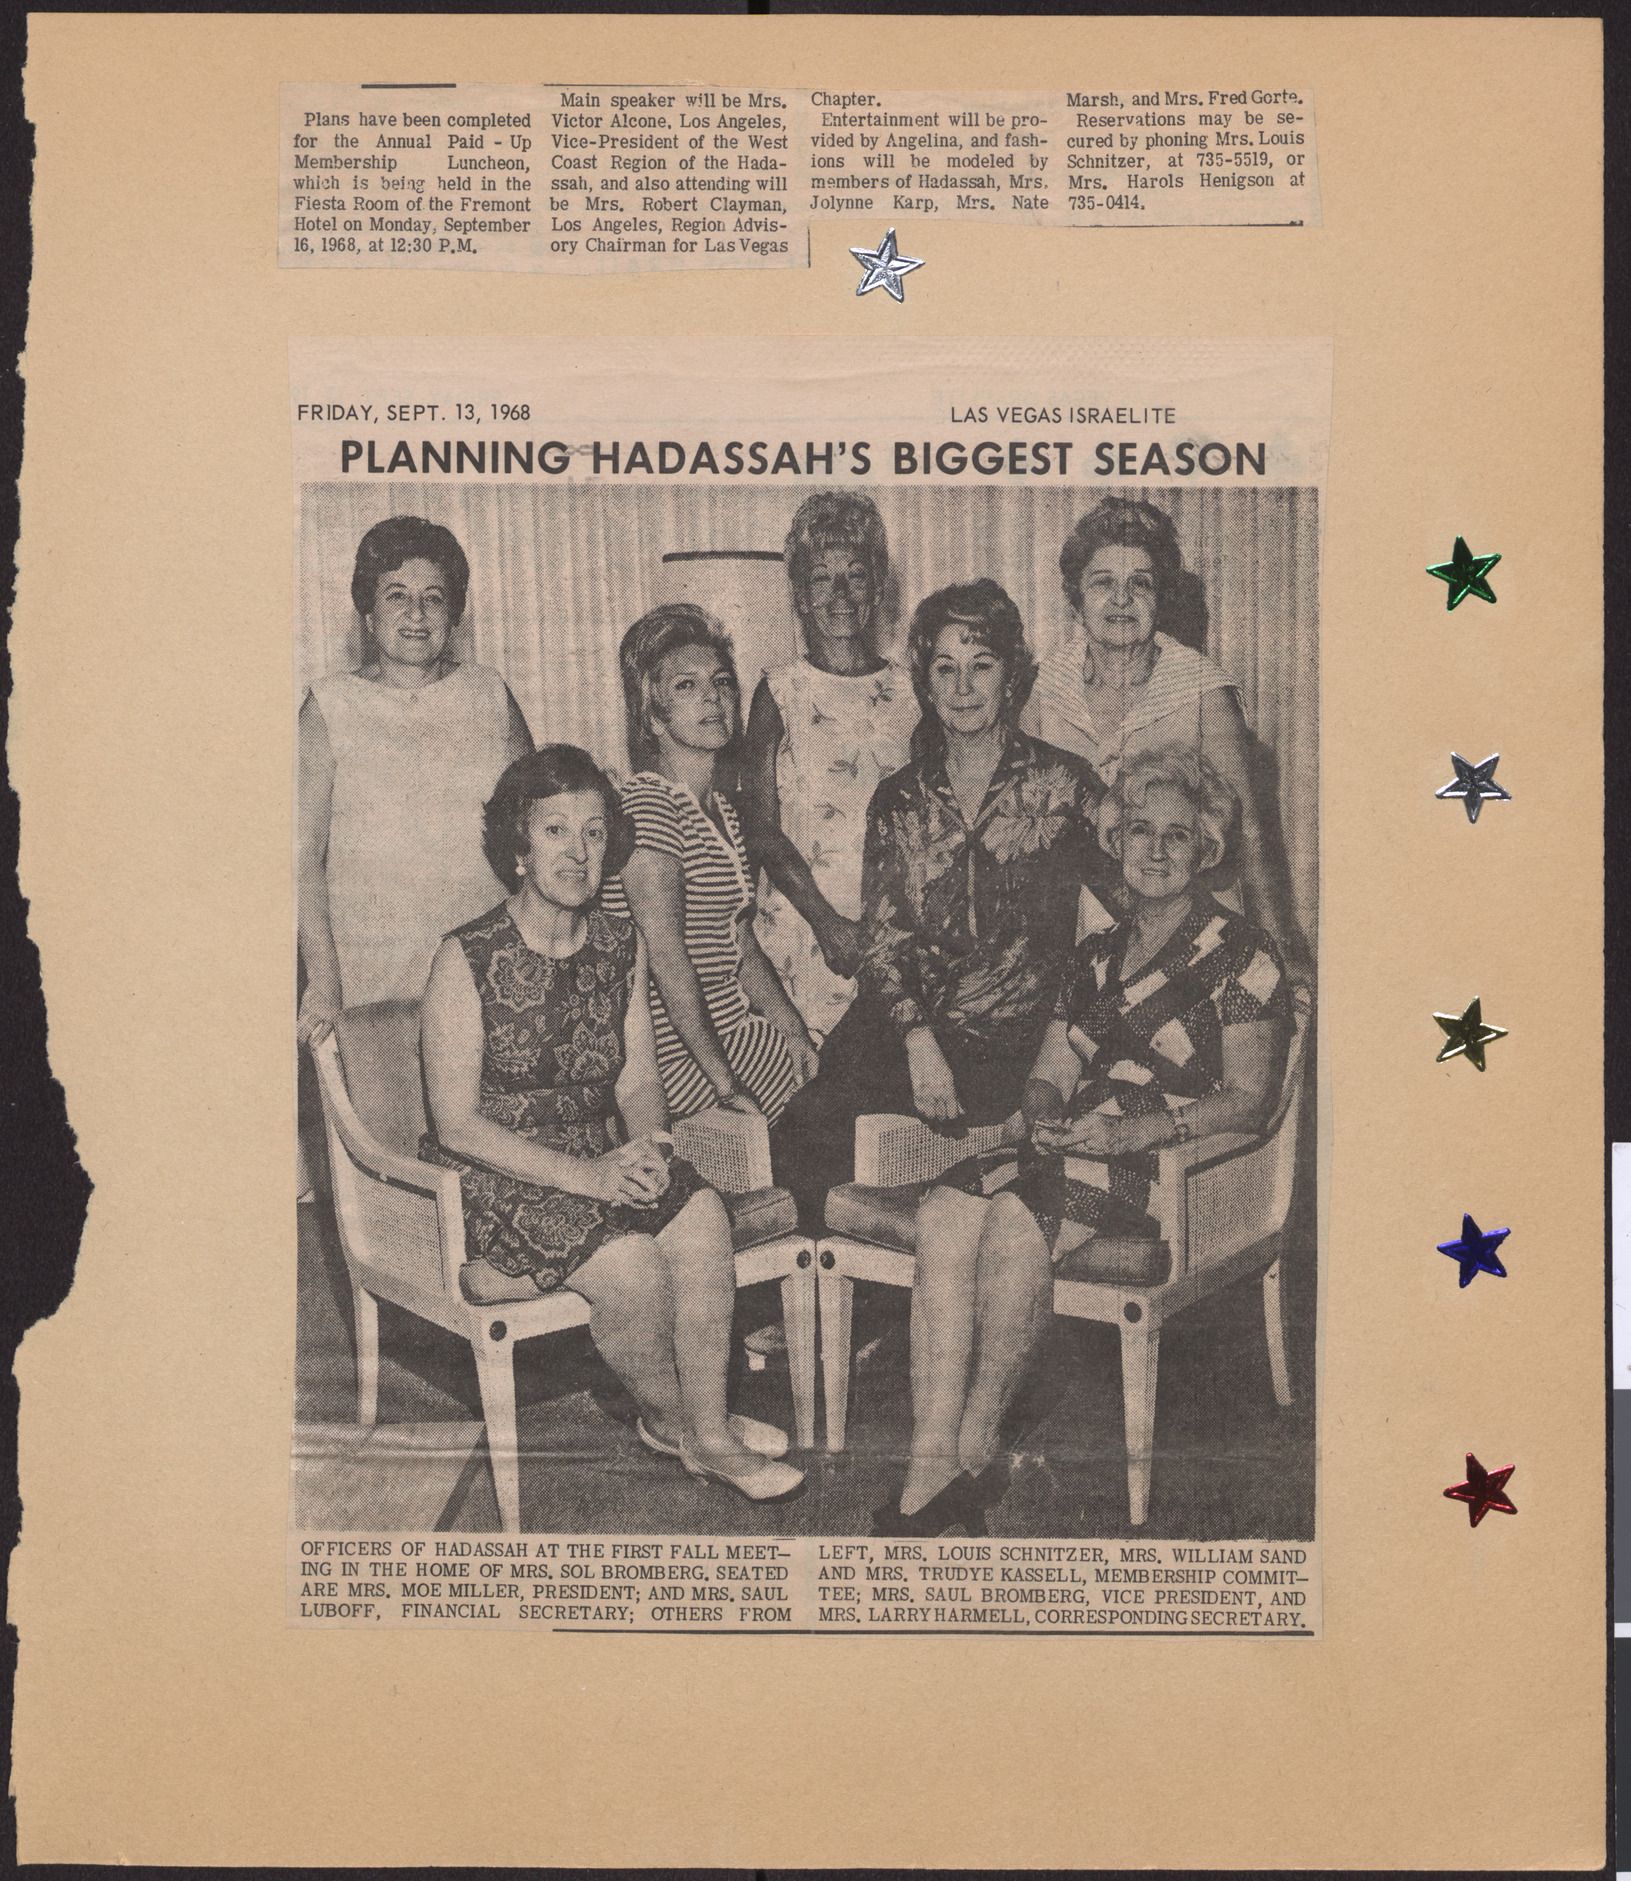 Newspaper clippings, Membership luncheon, publication and date unknown, and Planning Hadassah's Biggest Season, Las Vegas Israelite, September 13, 1968